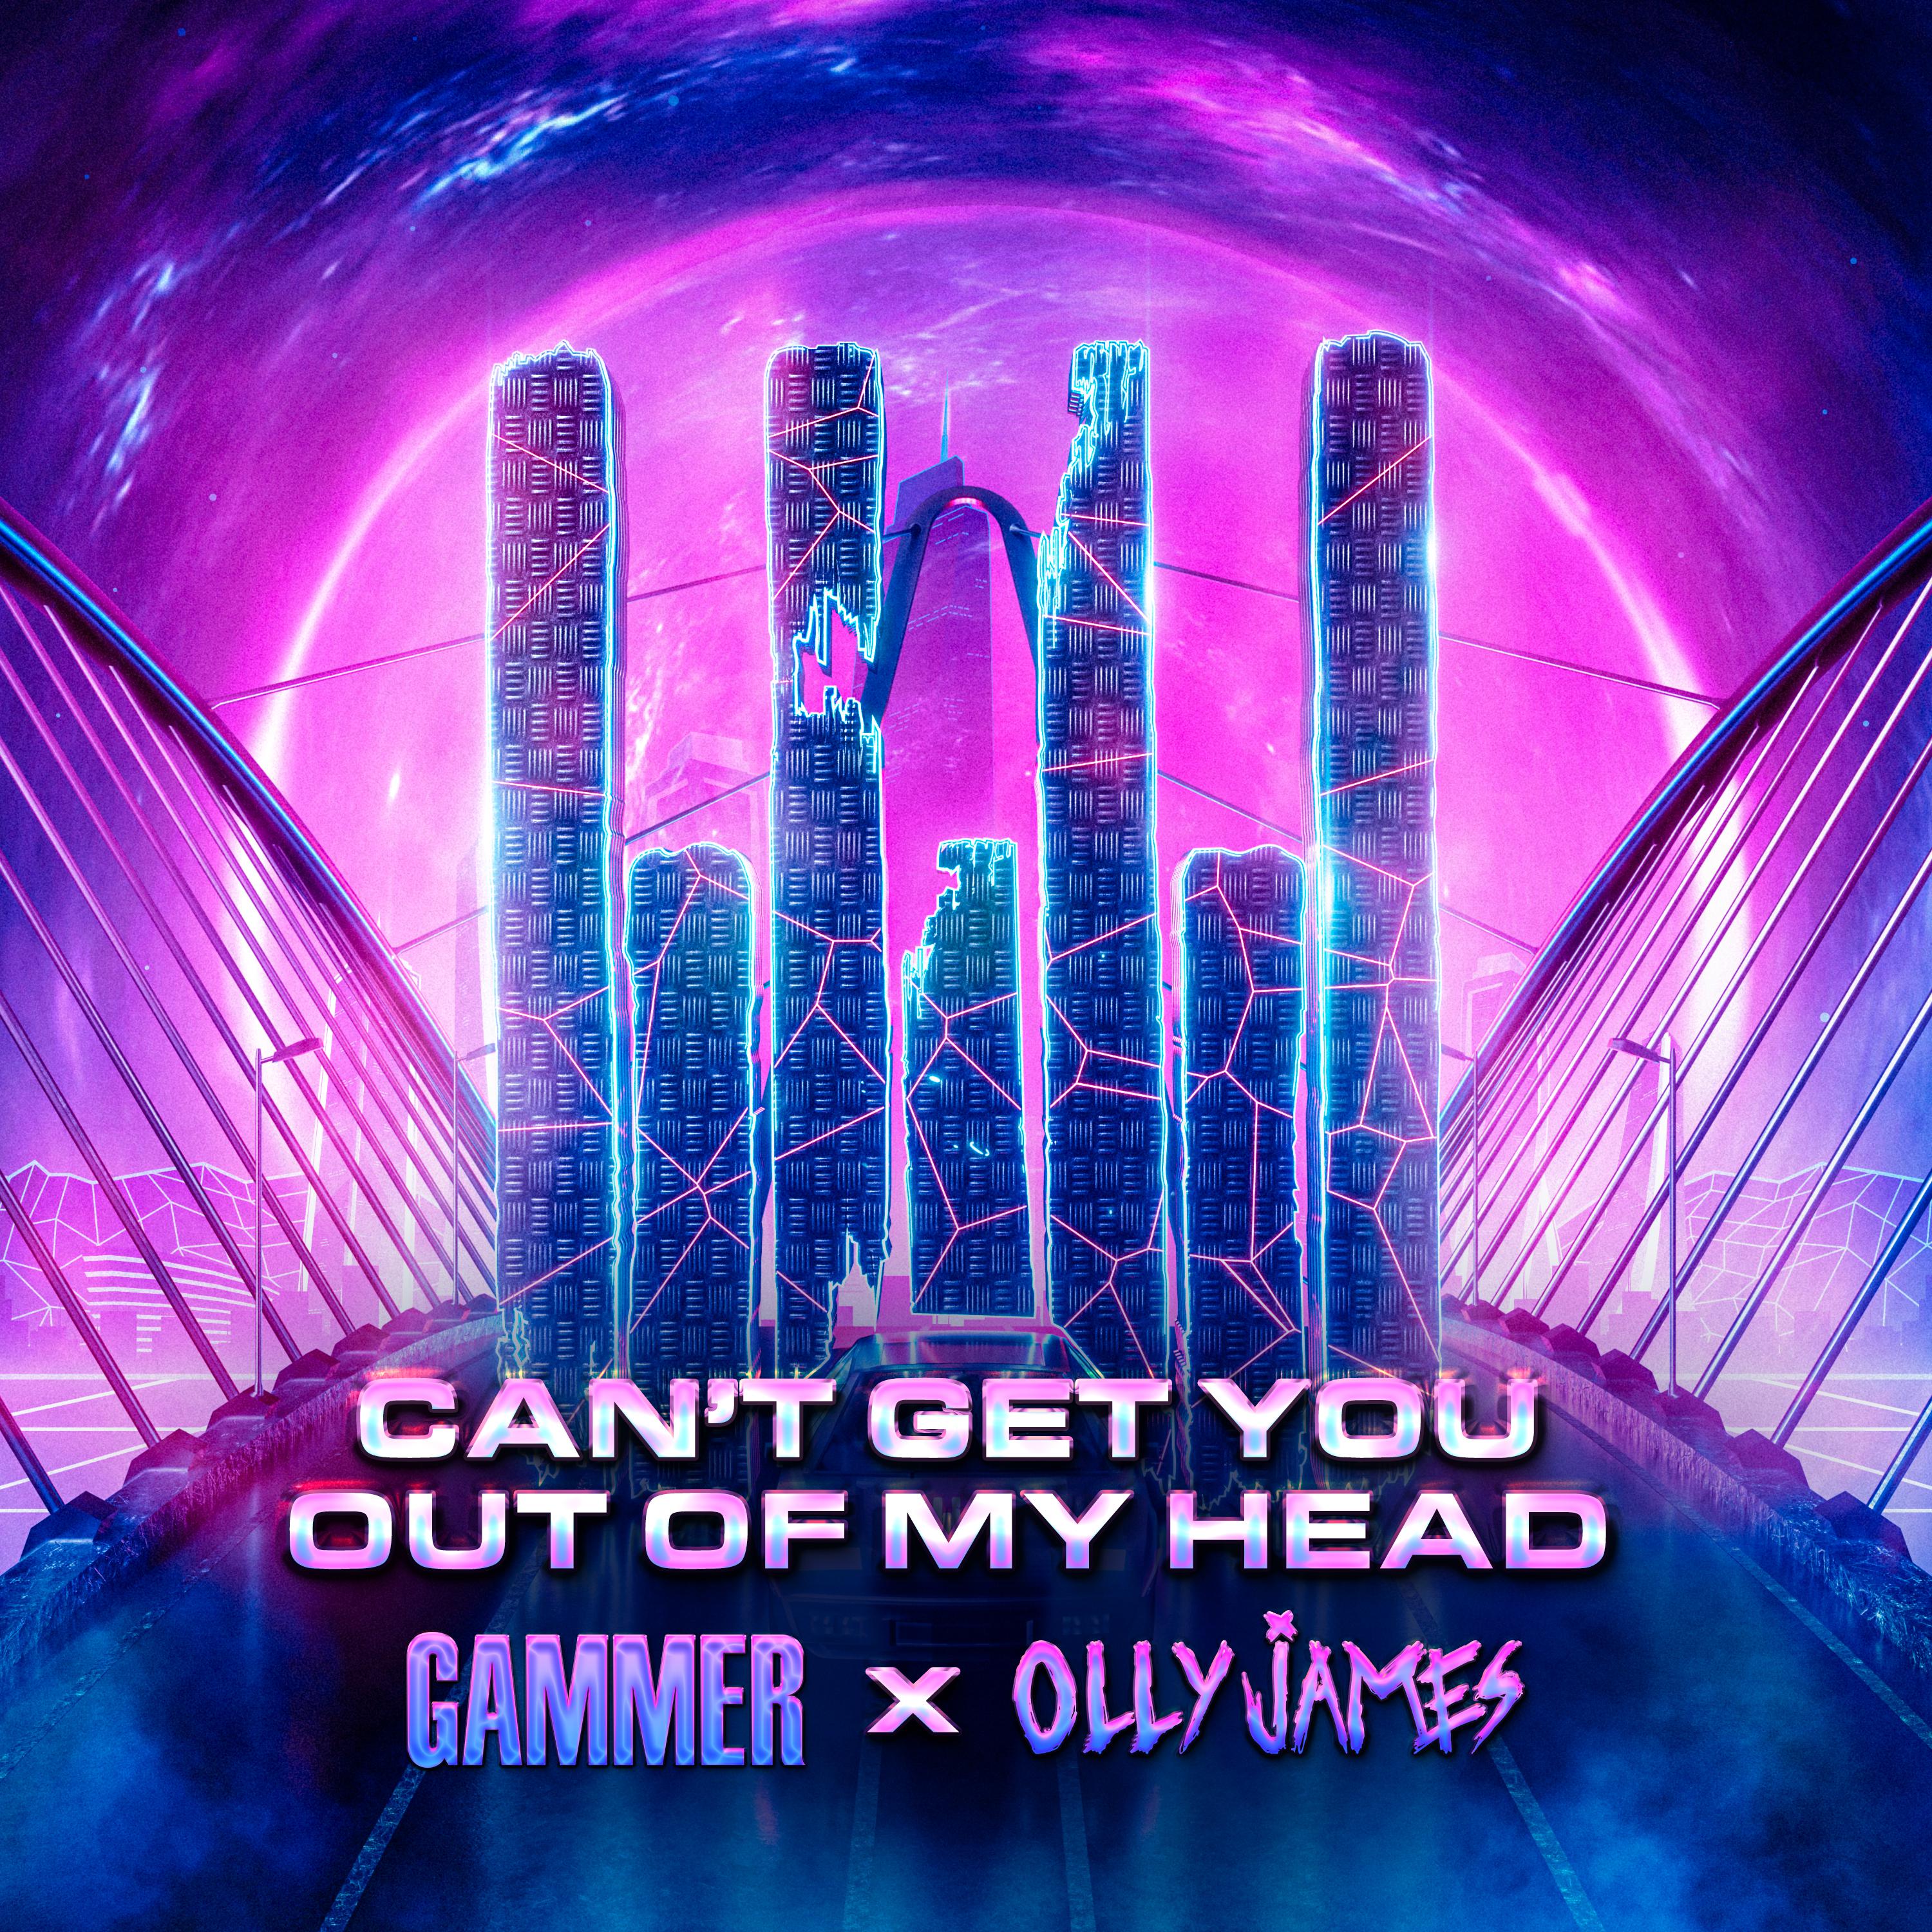 Gammer - Can't Get You Out Of My Head